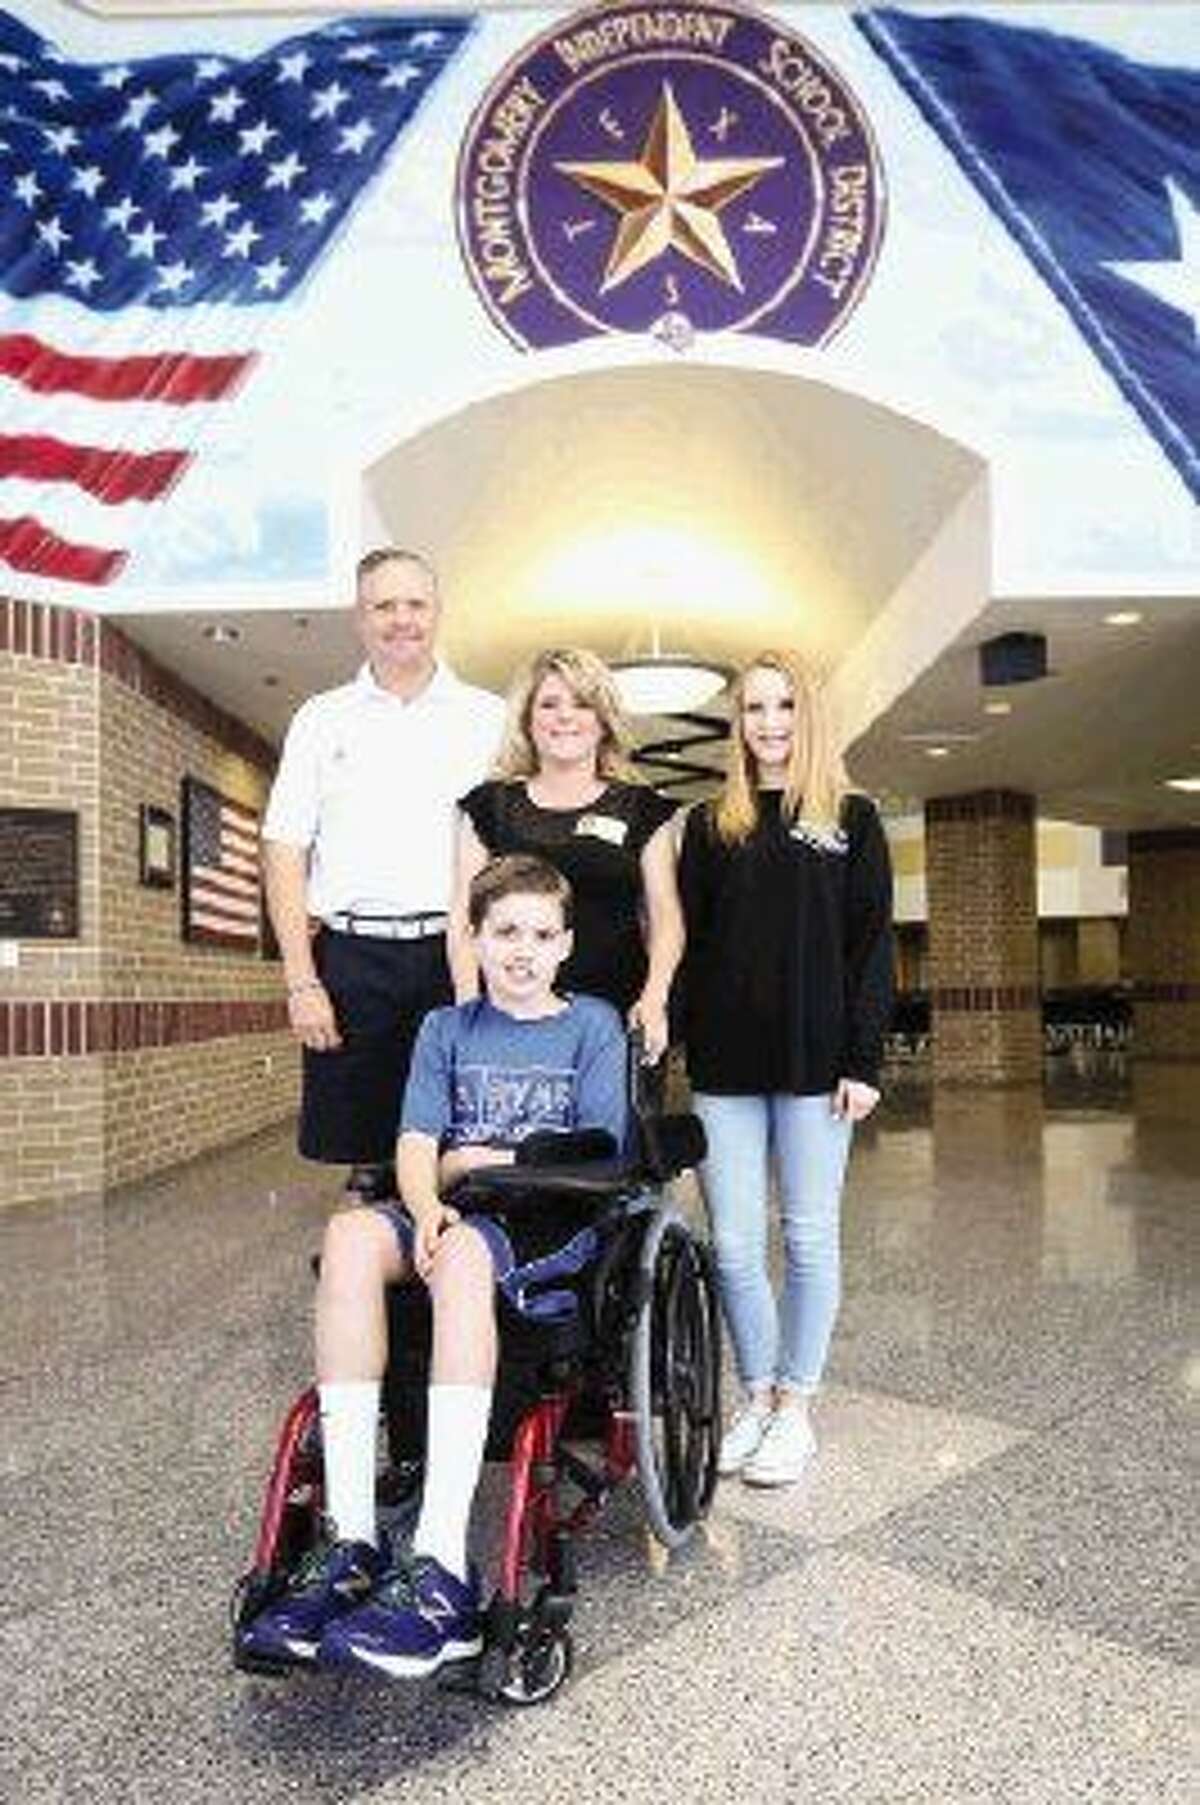 Ryan Logan and his family pose for a portrait on Friday at Montgomery Junior High School.